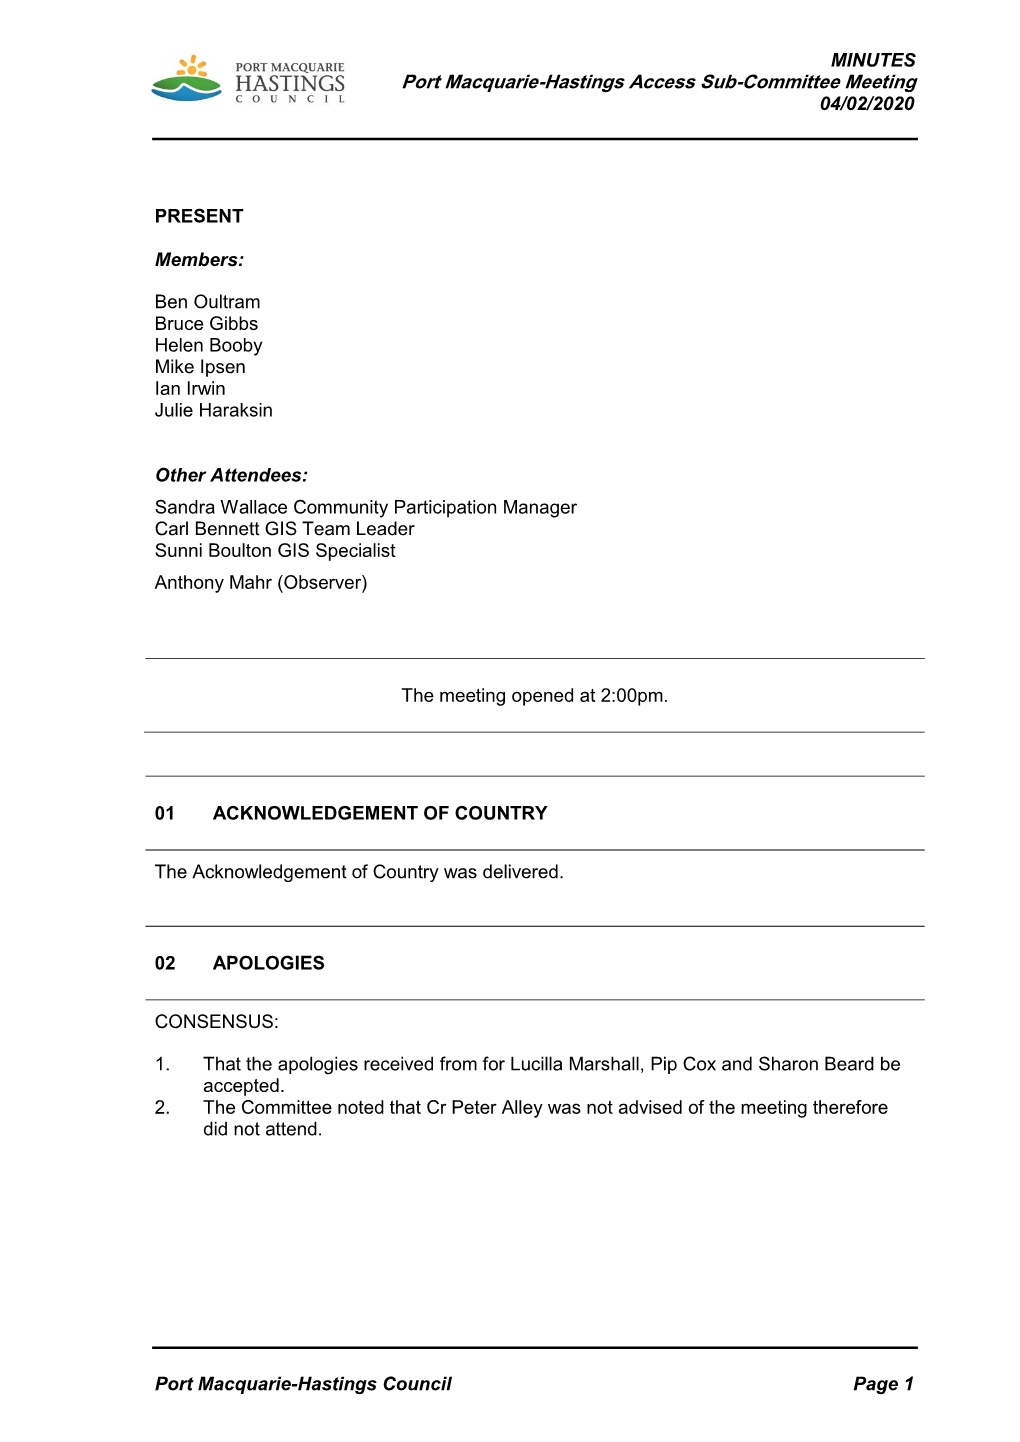 Minutes of Port Macquarie-Hastings Access Sub-Committee